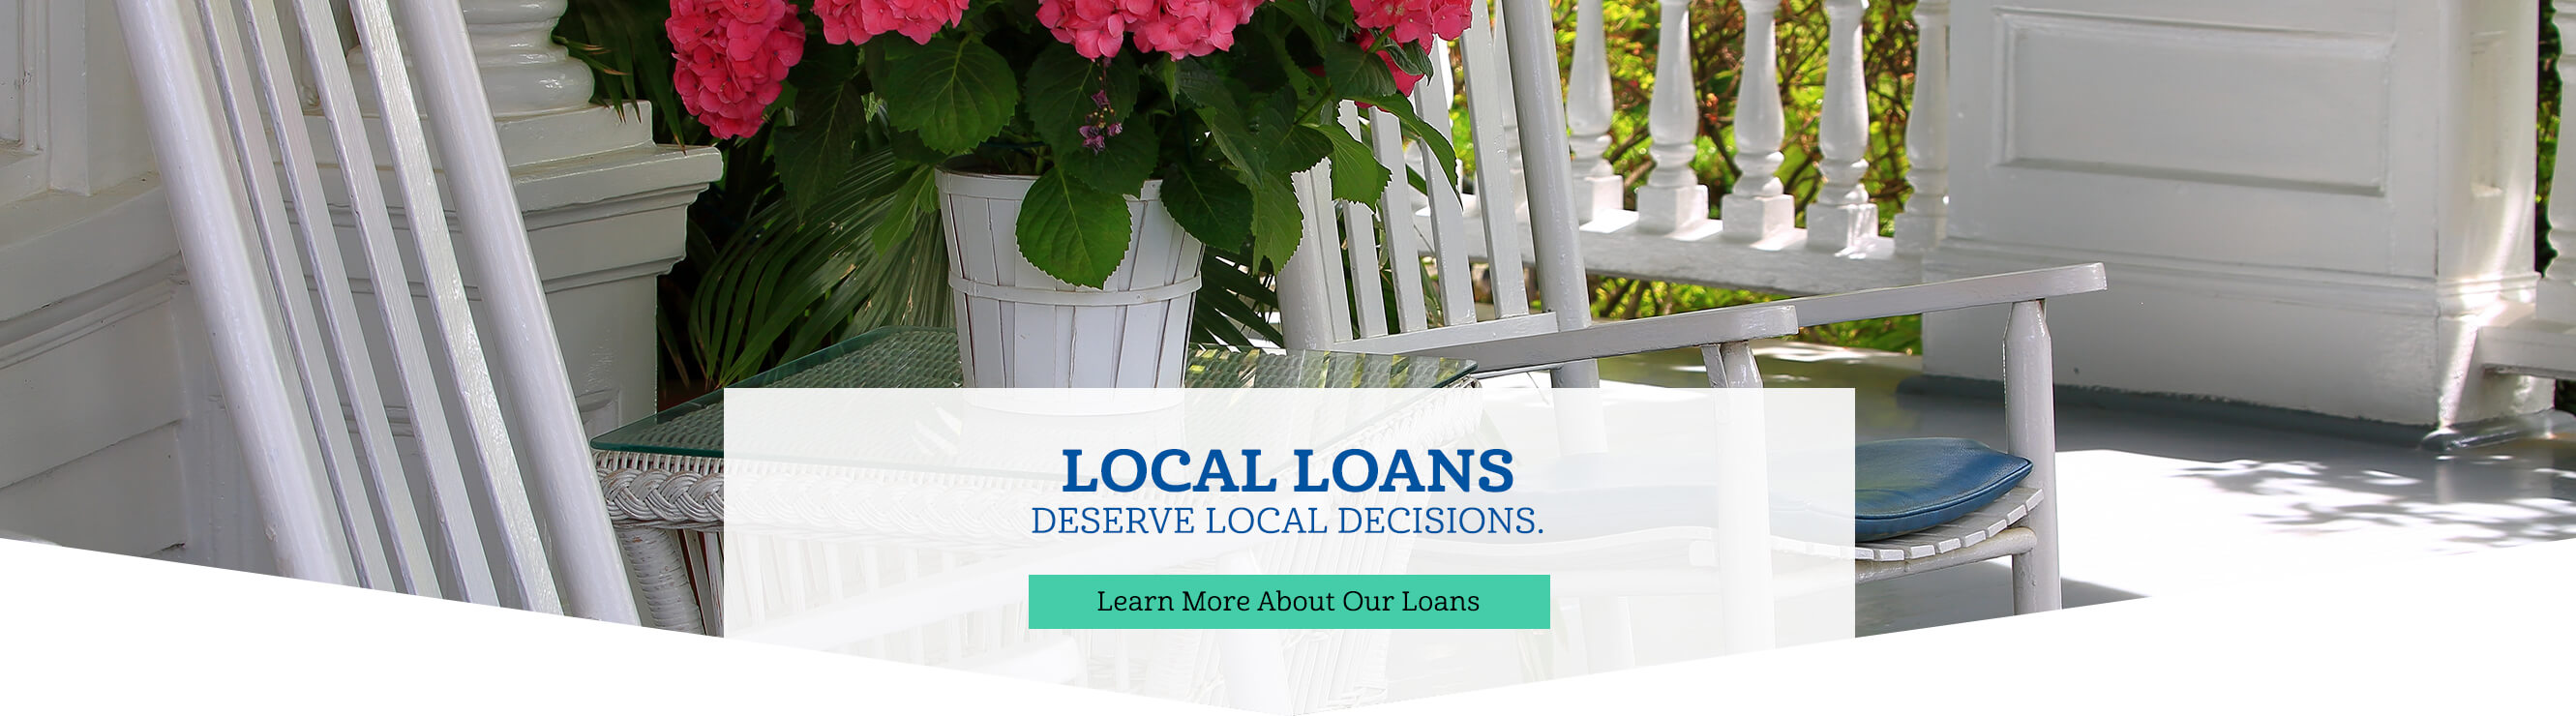 Local Loans Deserve Local Decisions. Learn more about our Loans